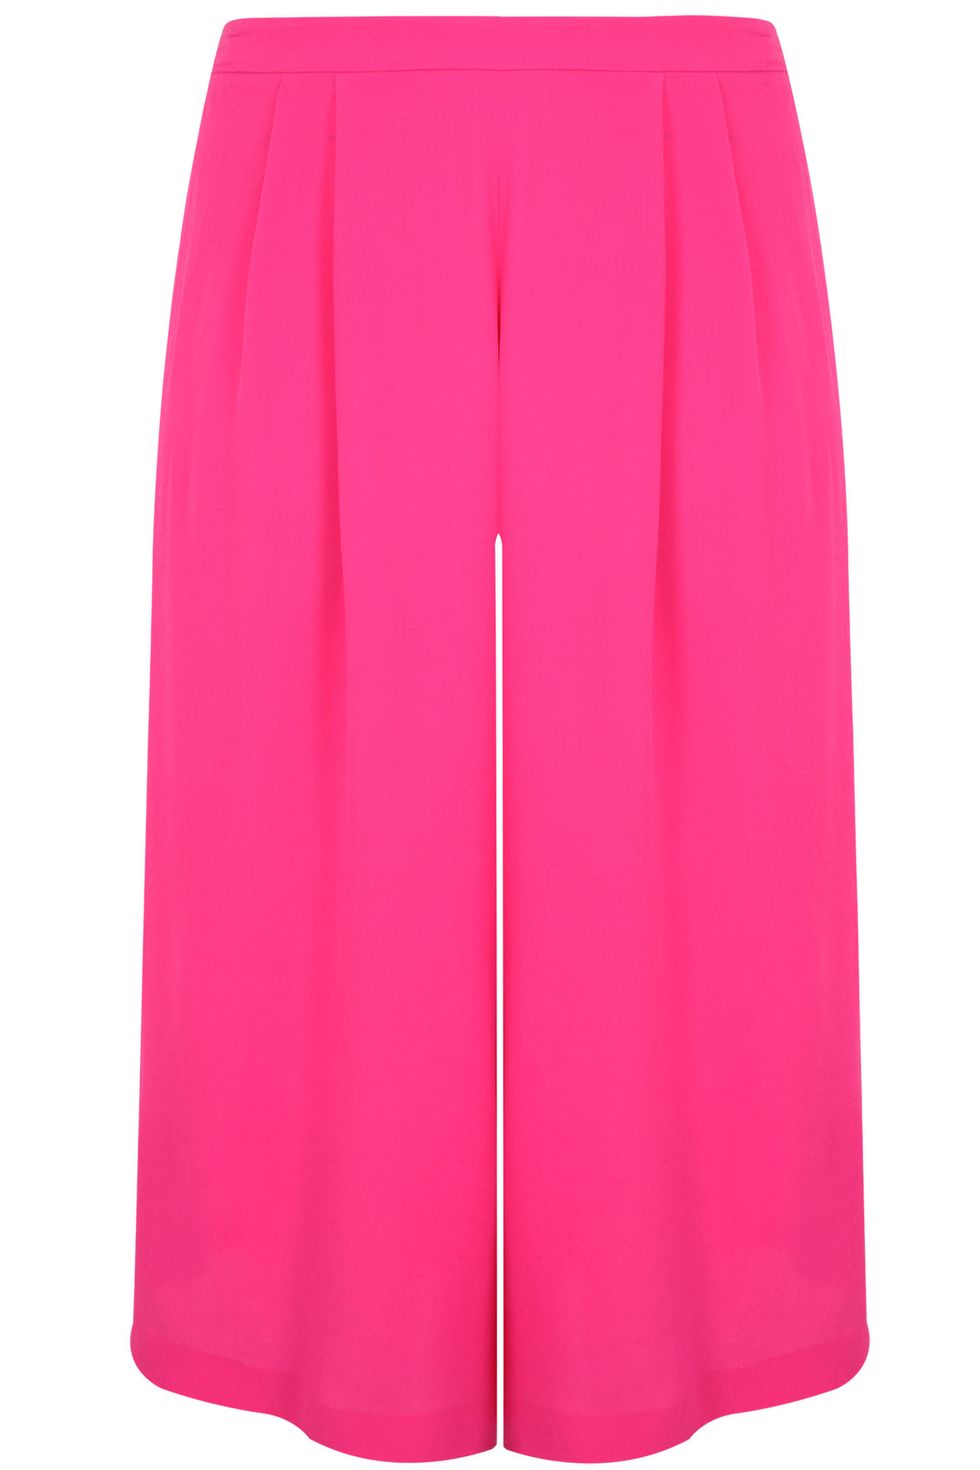 Yours Clothing - Pink Culottes - £23 - 51847f.jpg